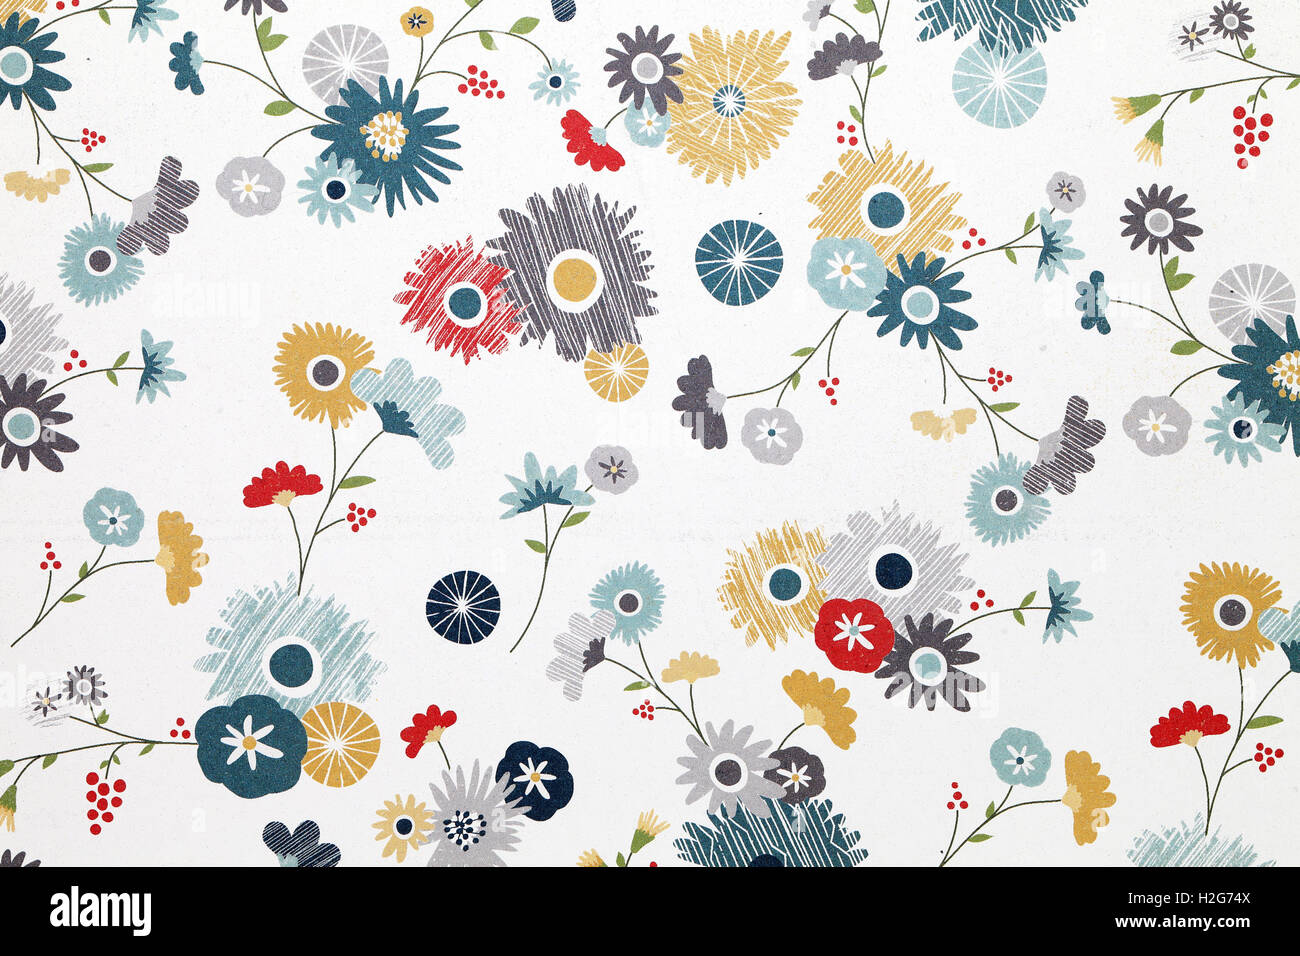 flower pattern paper, texture background Stock Photo